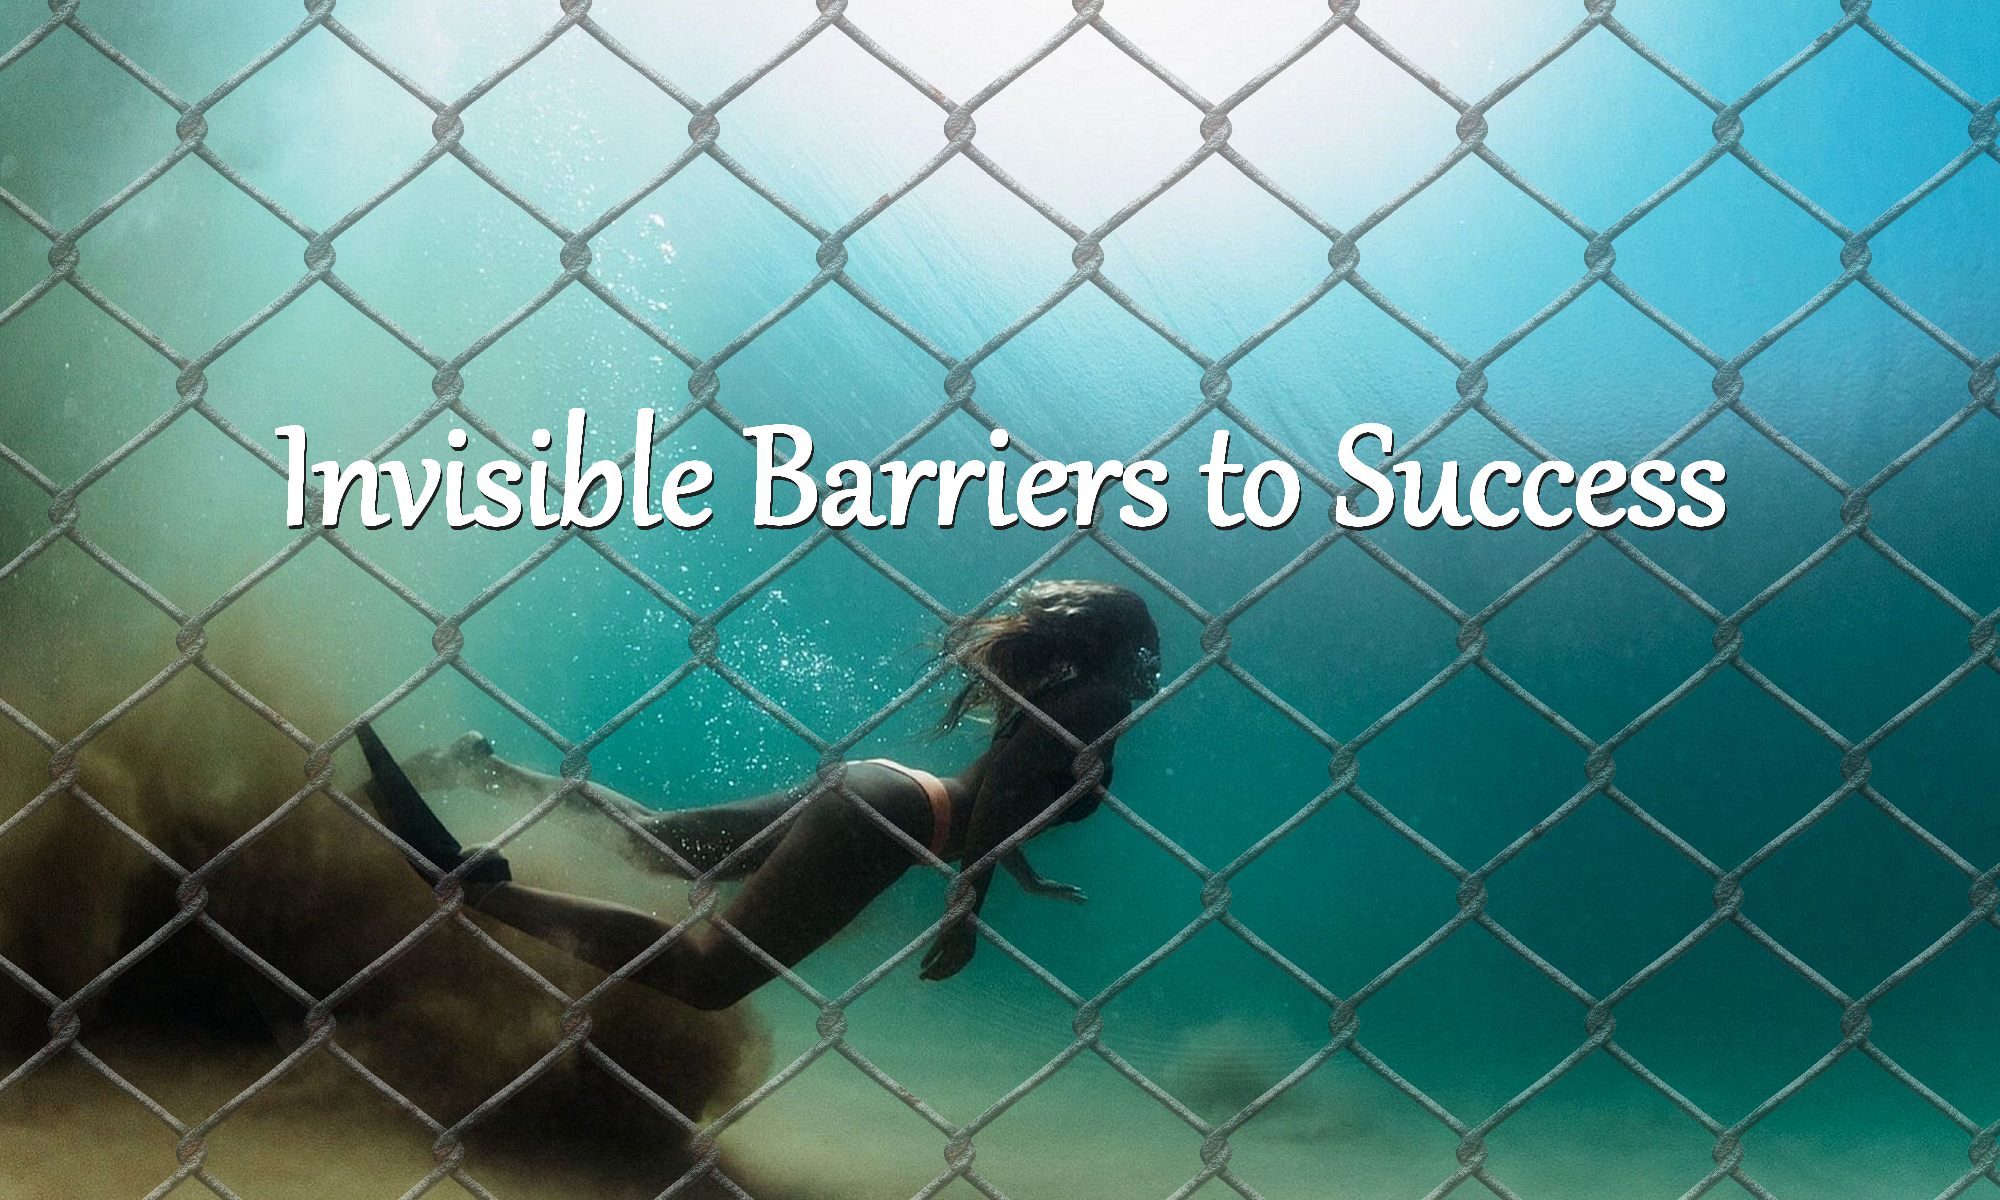 keys-to-remove-invisible-barriers-to-success-5-tips-ways-money